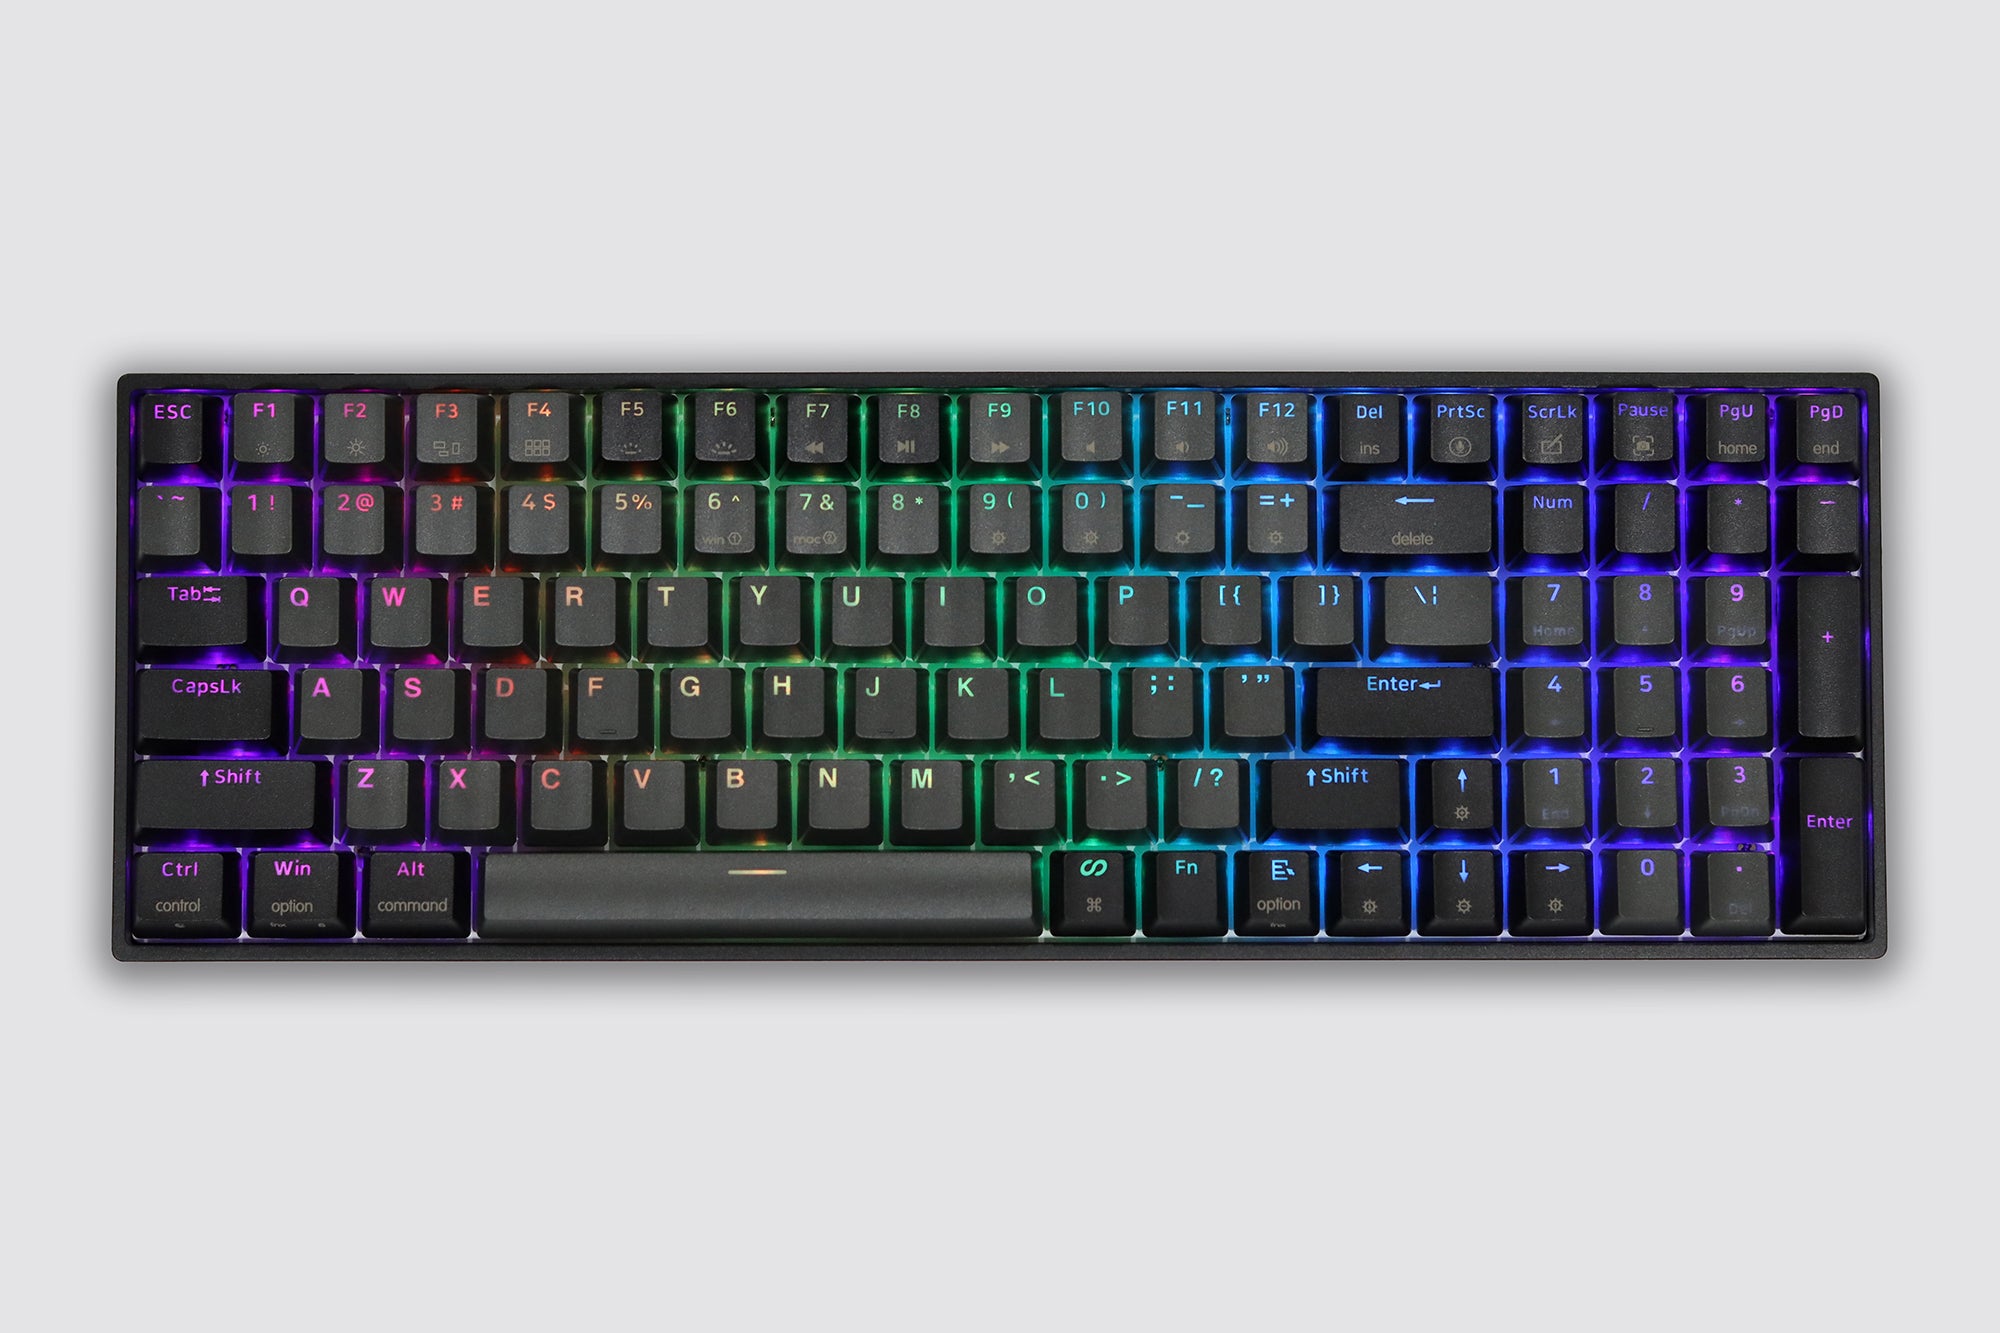 The 96% Keyboard: A Blend of Compactness and Functionality